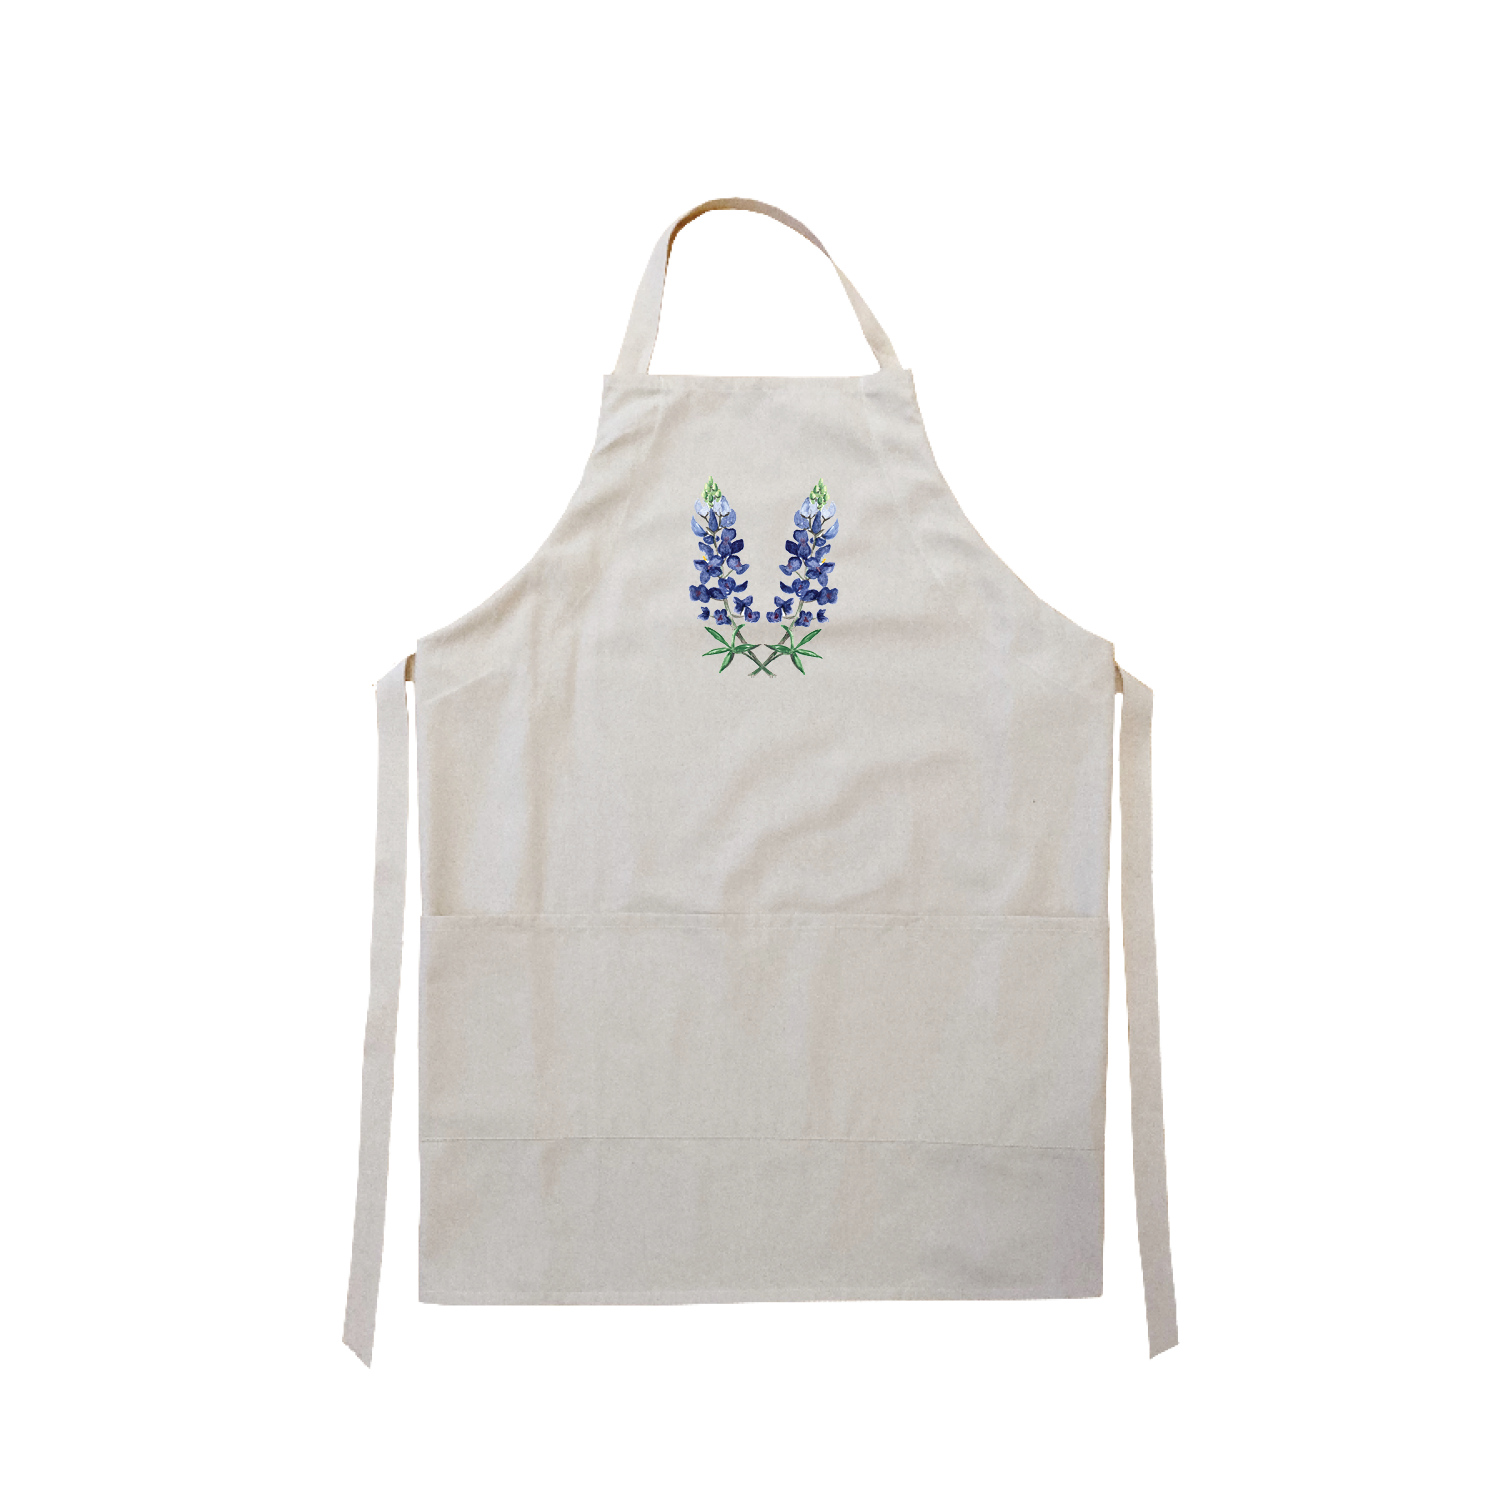 two bluebells apron